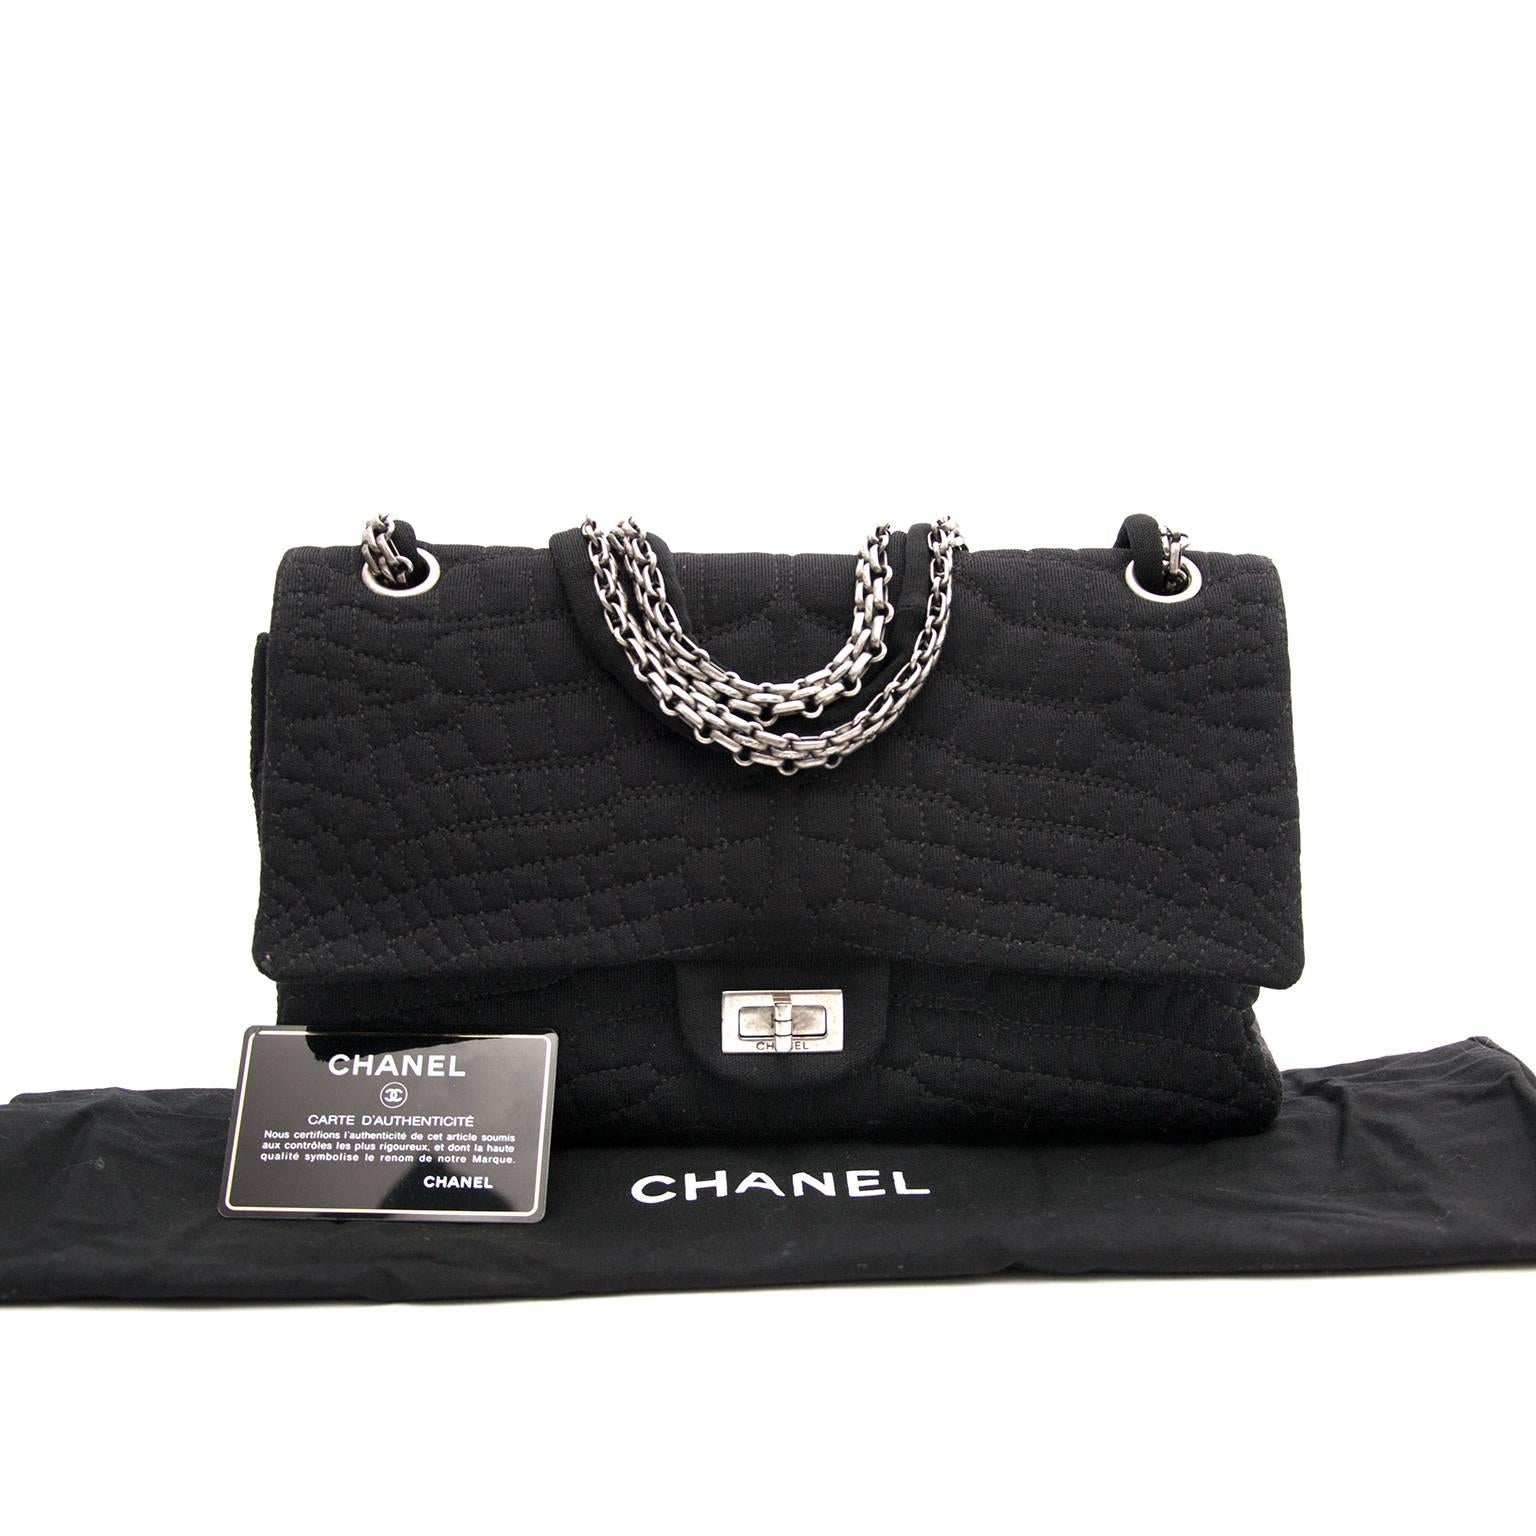 Excellent condition

Estimated retail price: €4590

Chanel Large 2.55 Black Fabric Bag

The iconic Chanel 2.55 in a beautiful black fabric. The bag has one large compartiment where you can fit allyour belongings.The inside is finished with the